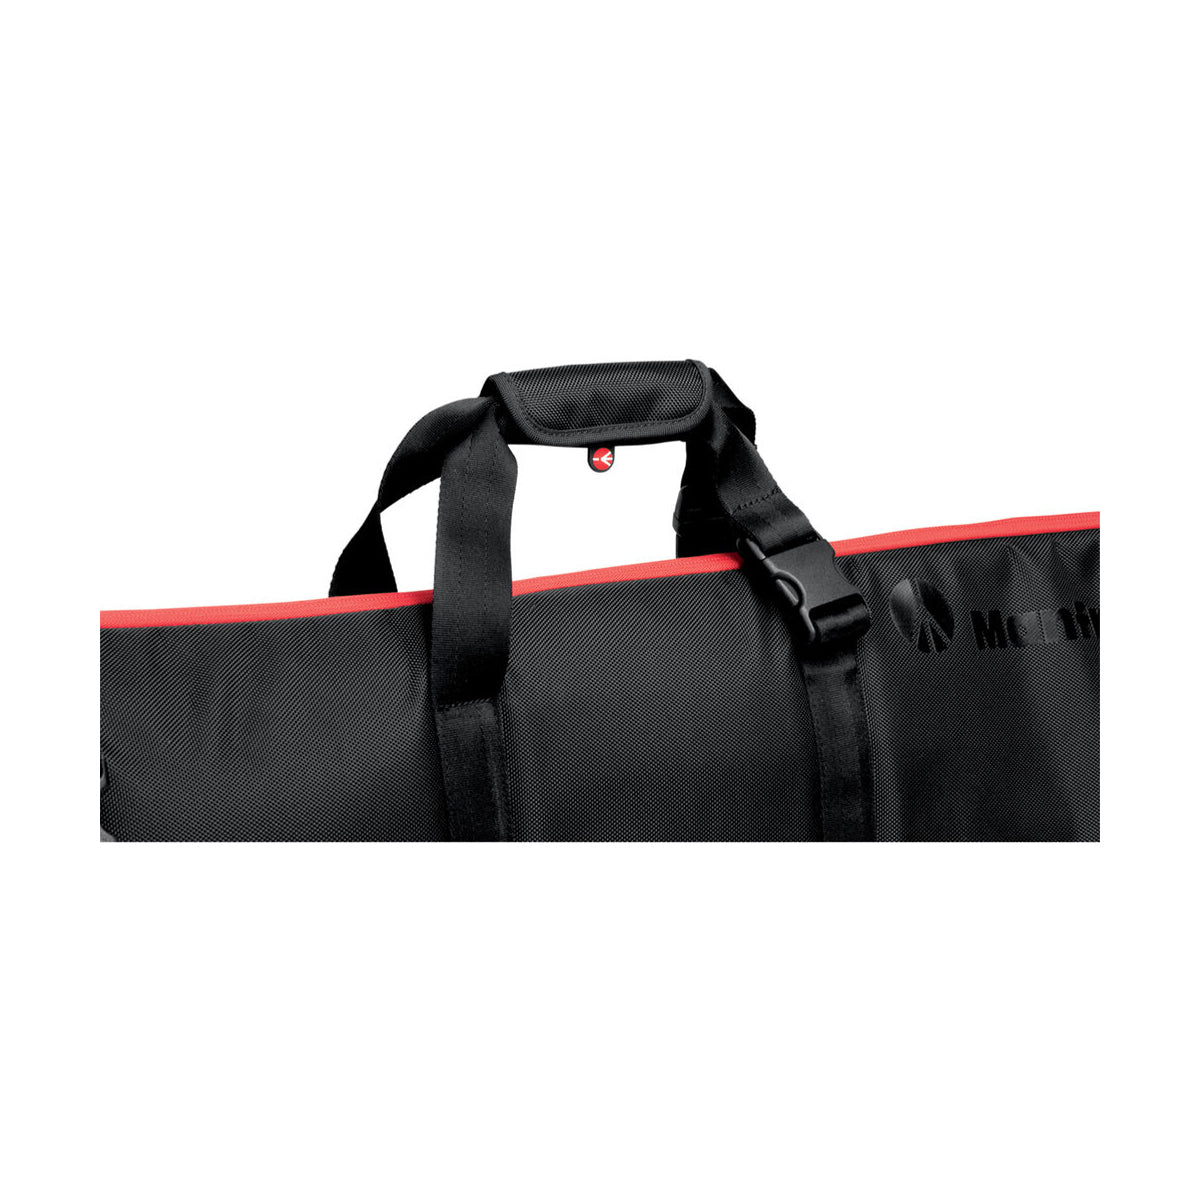 Manfrotto MBAG120PN Padded Tripod Bag 47.2”